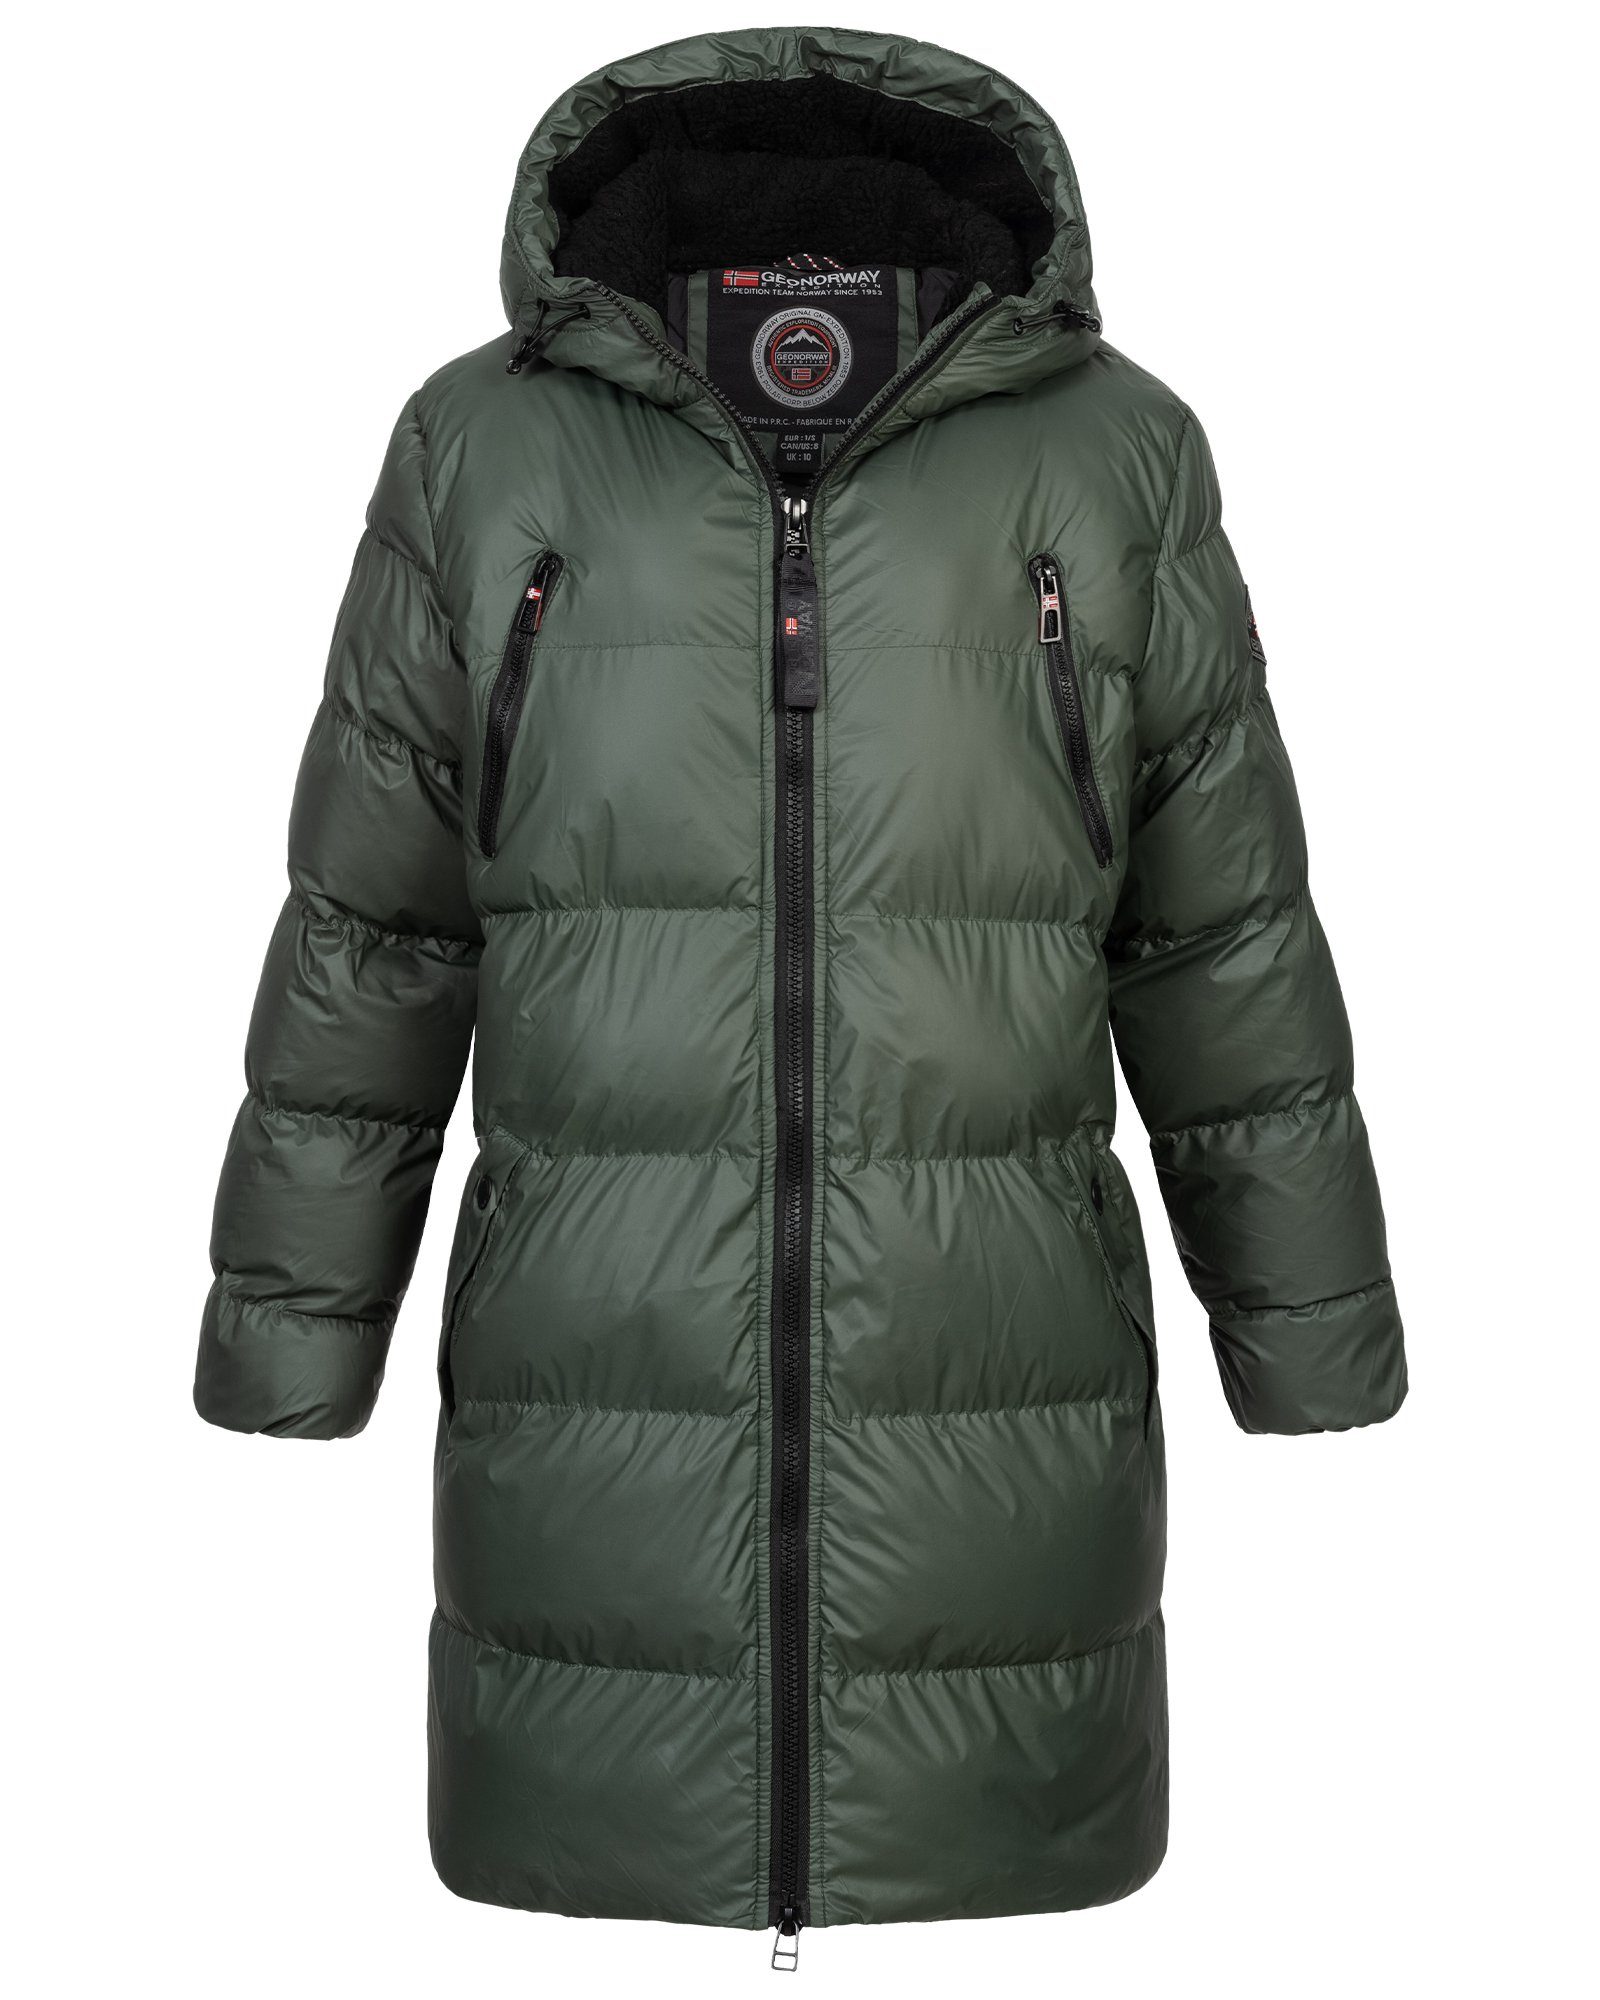 Geographical Norway Steppjacke Damen Winter Jacke Mantel Parka Steppjacke Steppmantel Wintermantel Olive